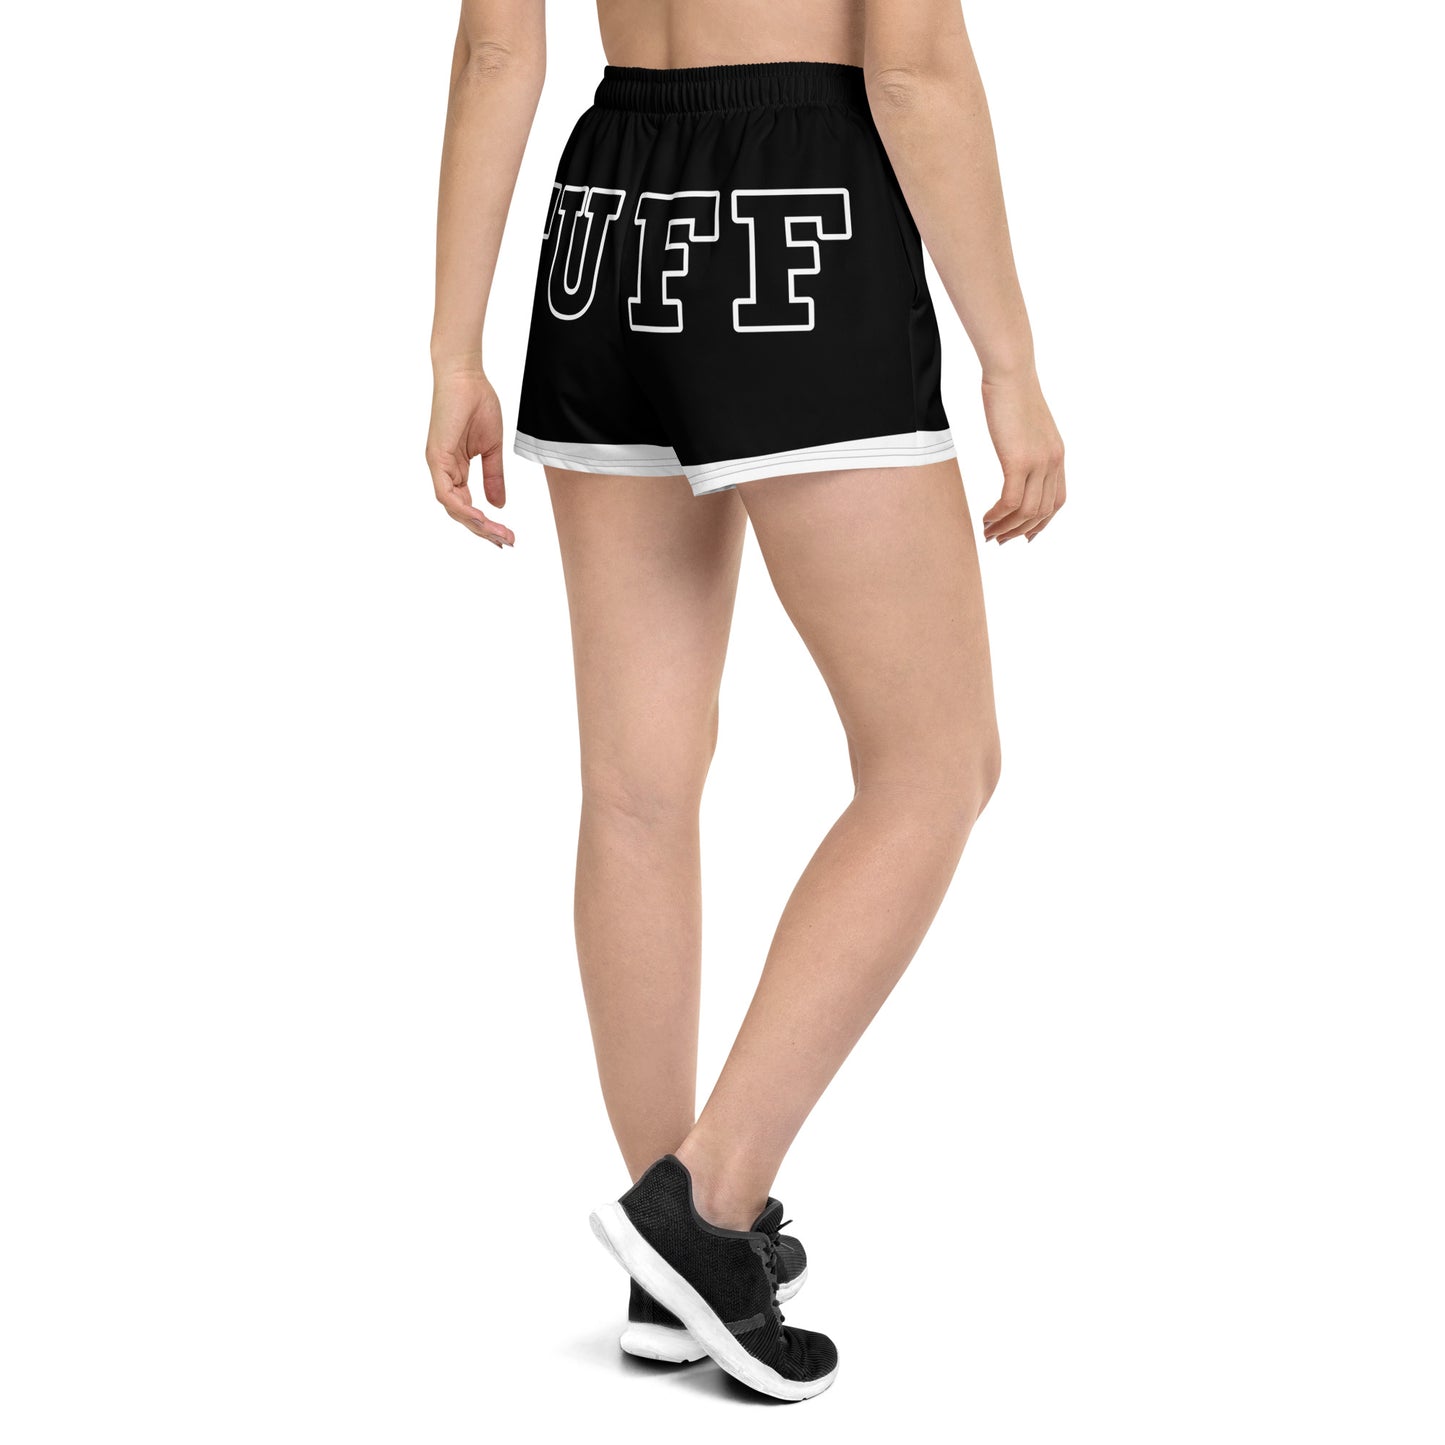 VICTORIOUS (Women’s Athletic Shorts)